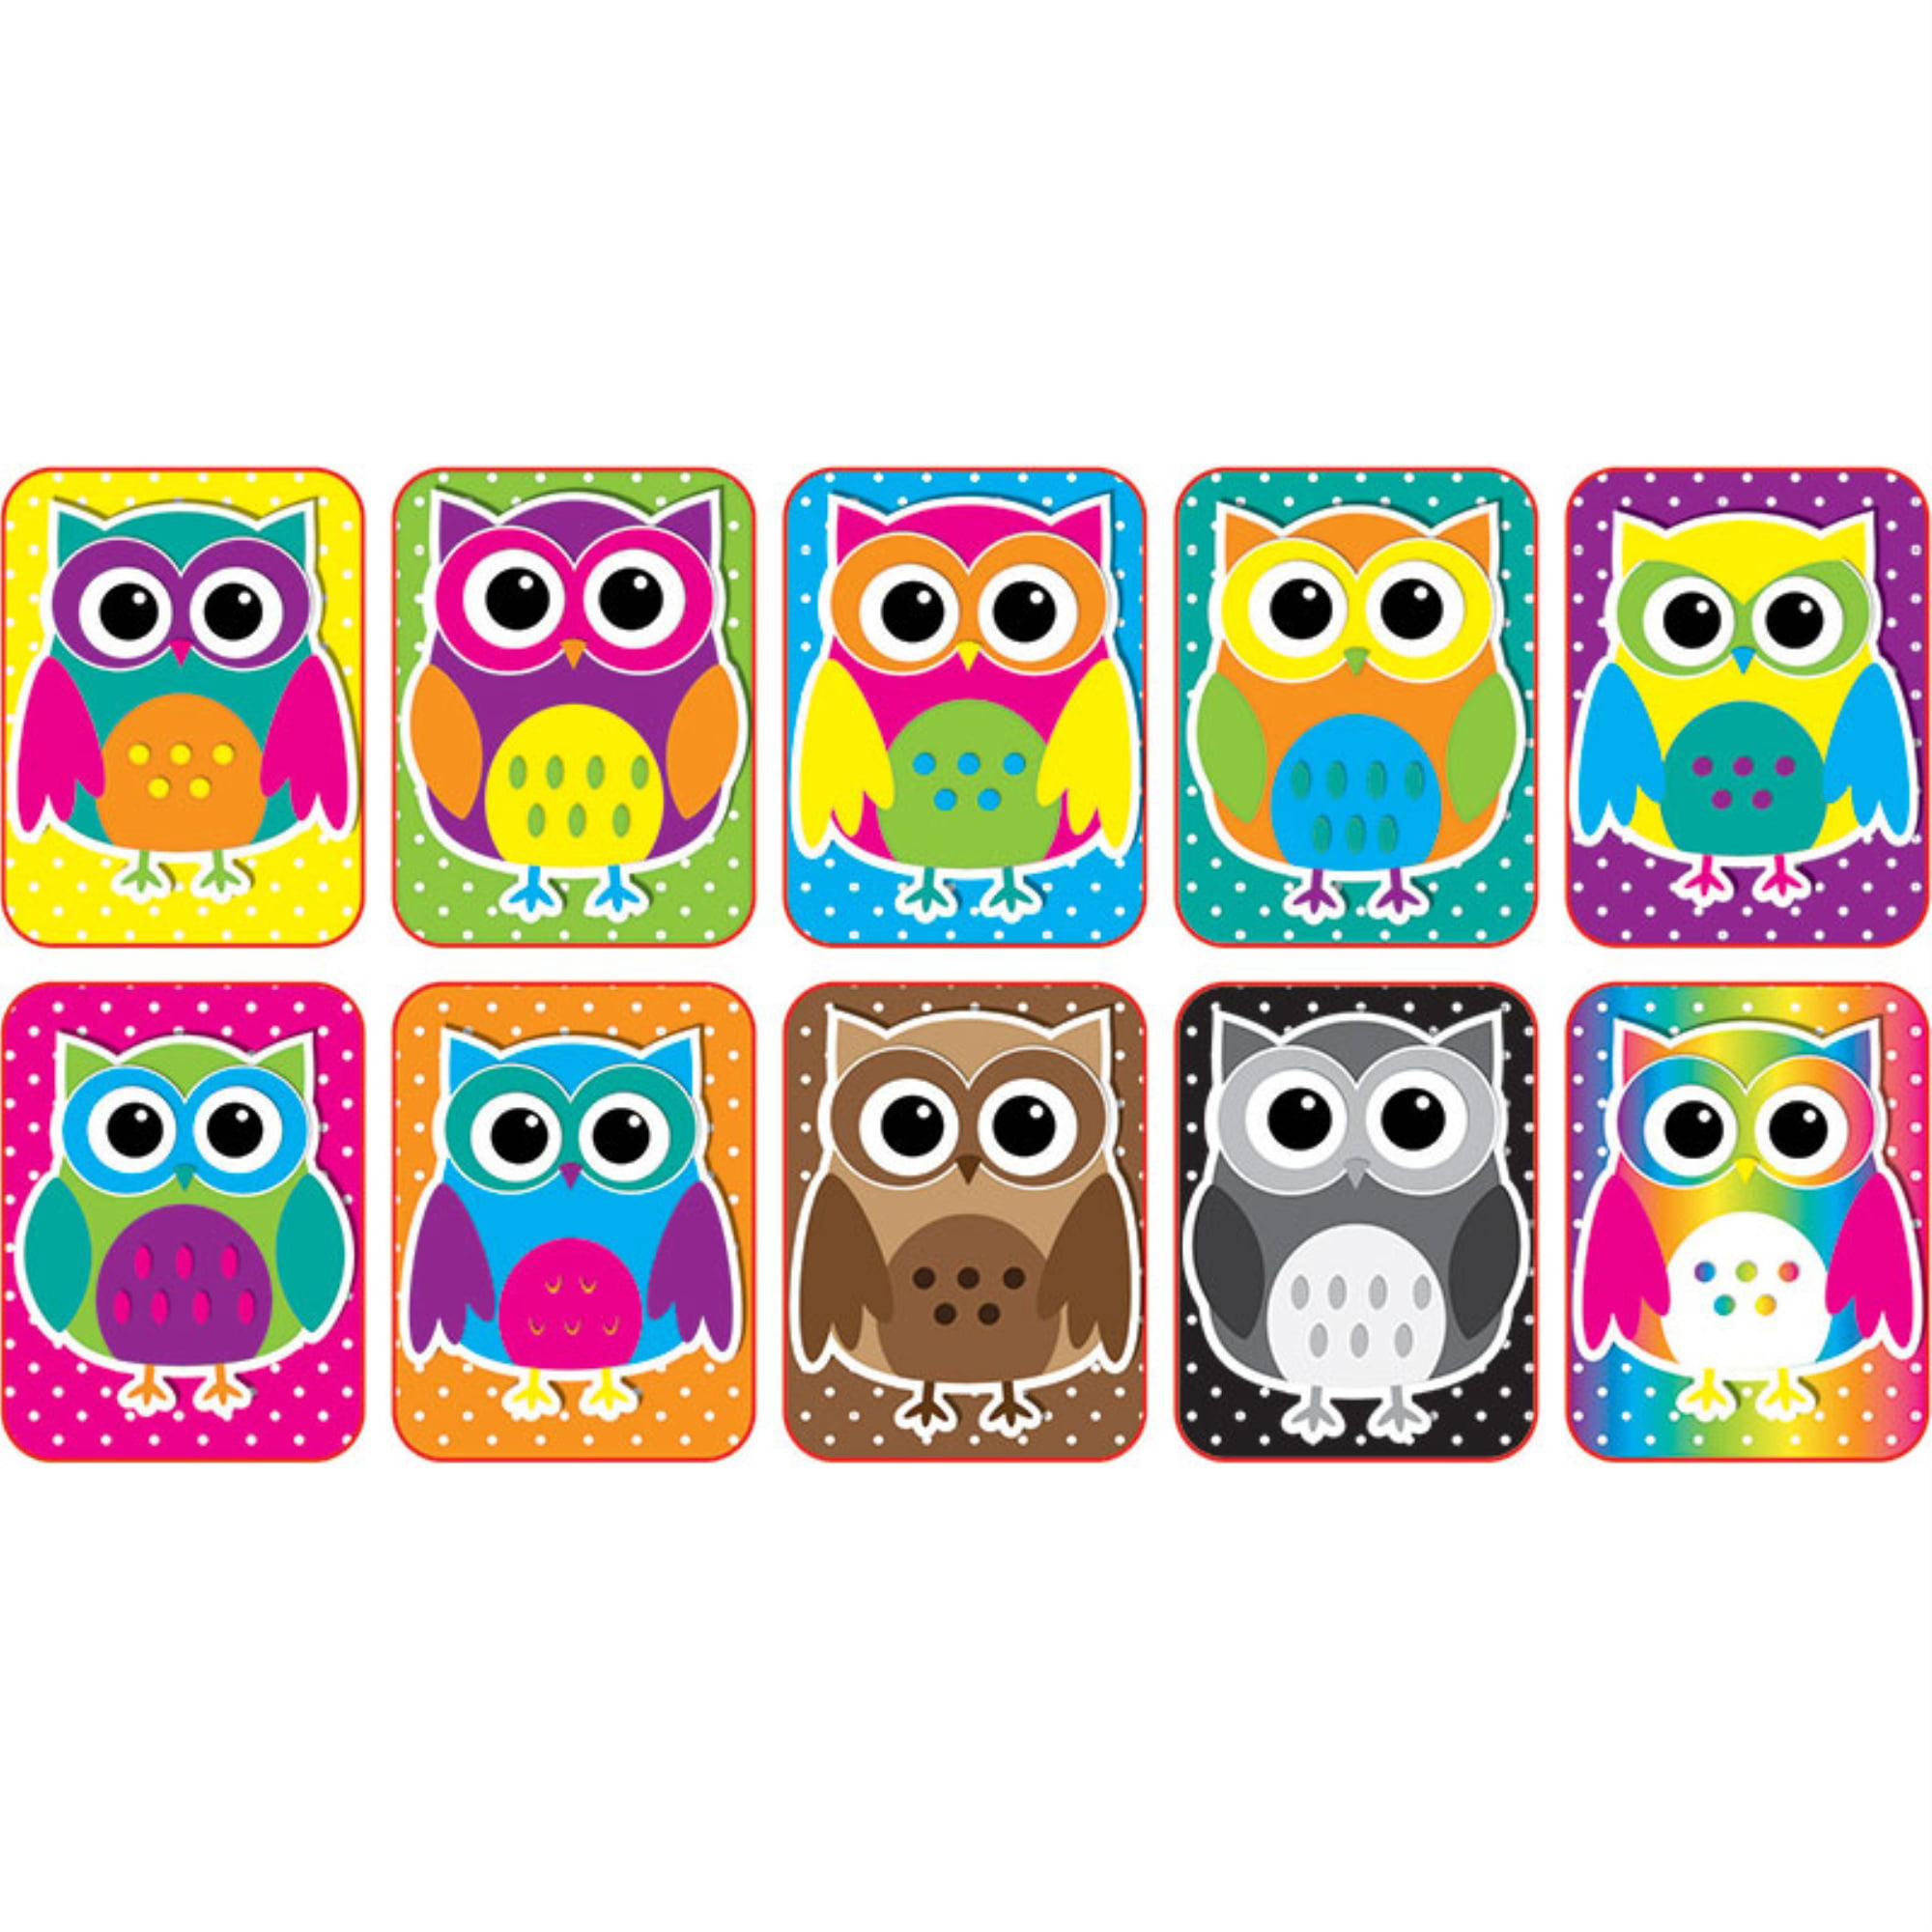 WEKOIL Cute Owl Erasers Magnetic Dry Erase Erasers Whiteboard Eraser Chalkboard Eraser with Felt for Students Teachers Classroom Office Home Pack of 4,Random Color